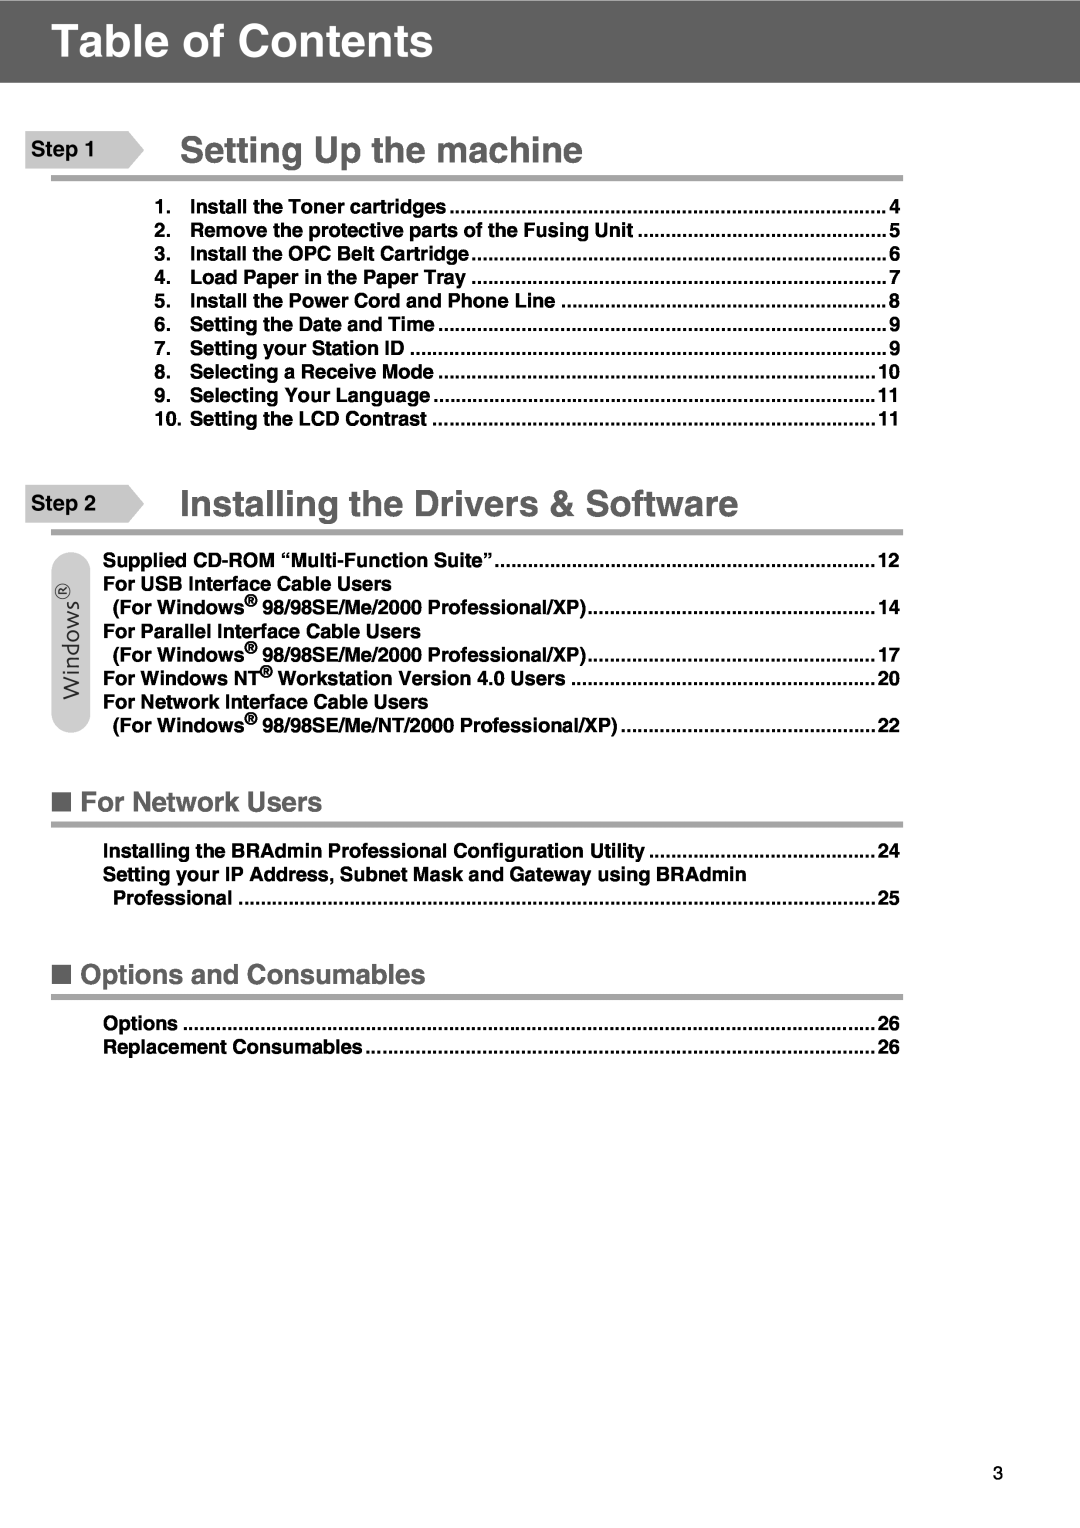 Microsoft SPC210SF Table of Contents, Setting Up the machine, Installing the Drivers & Software, For Network Users, Step 